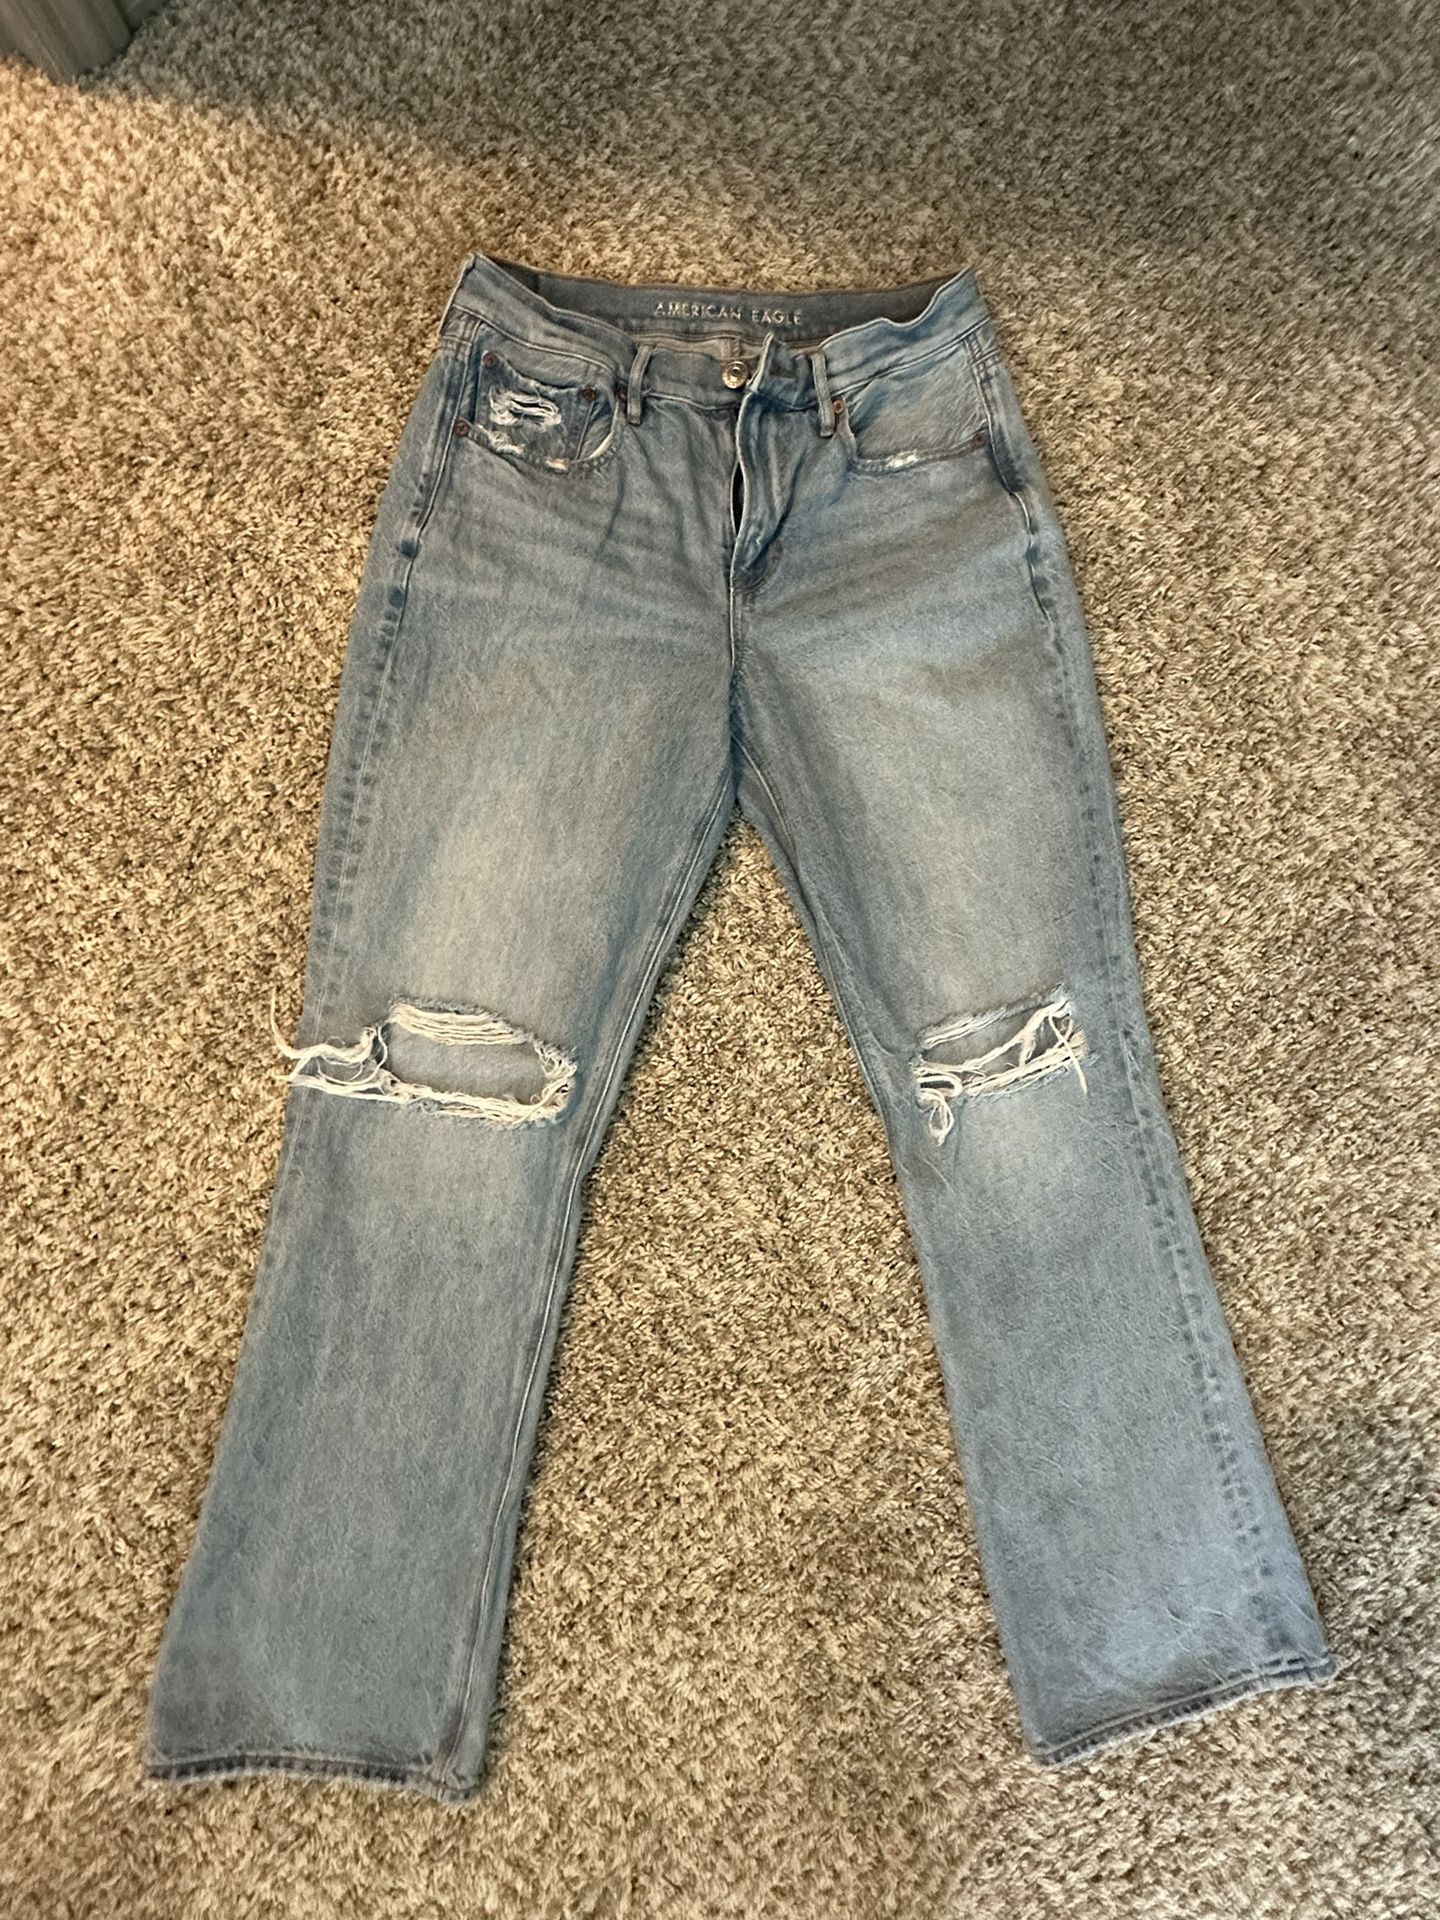 American Eagle jeans for ladies